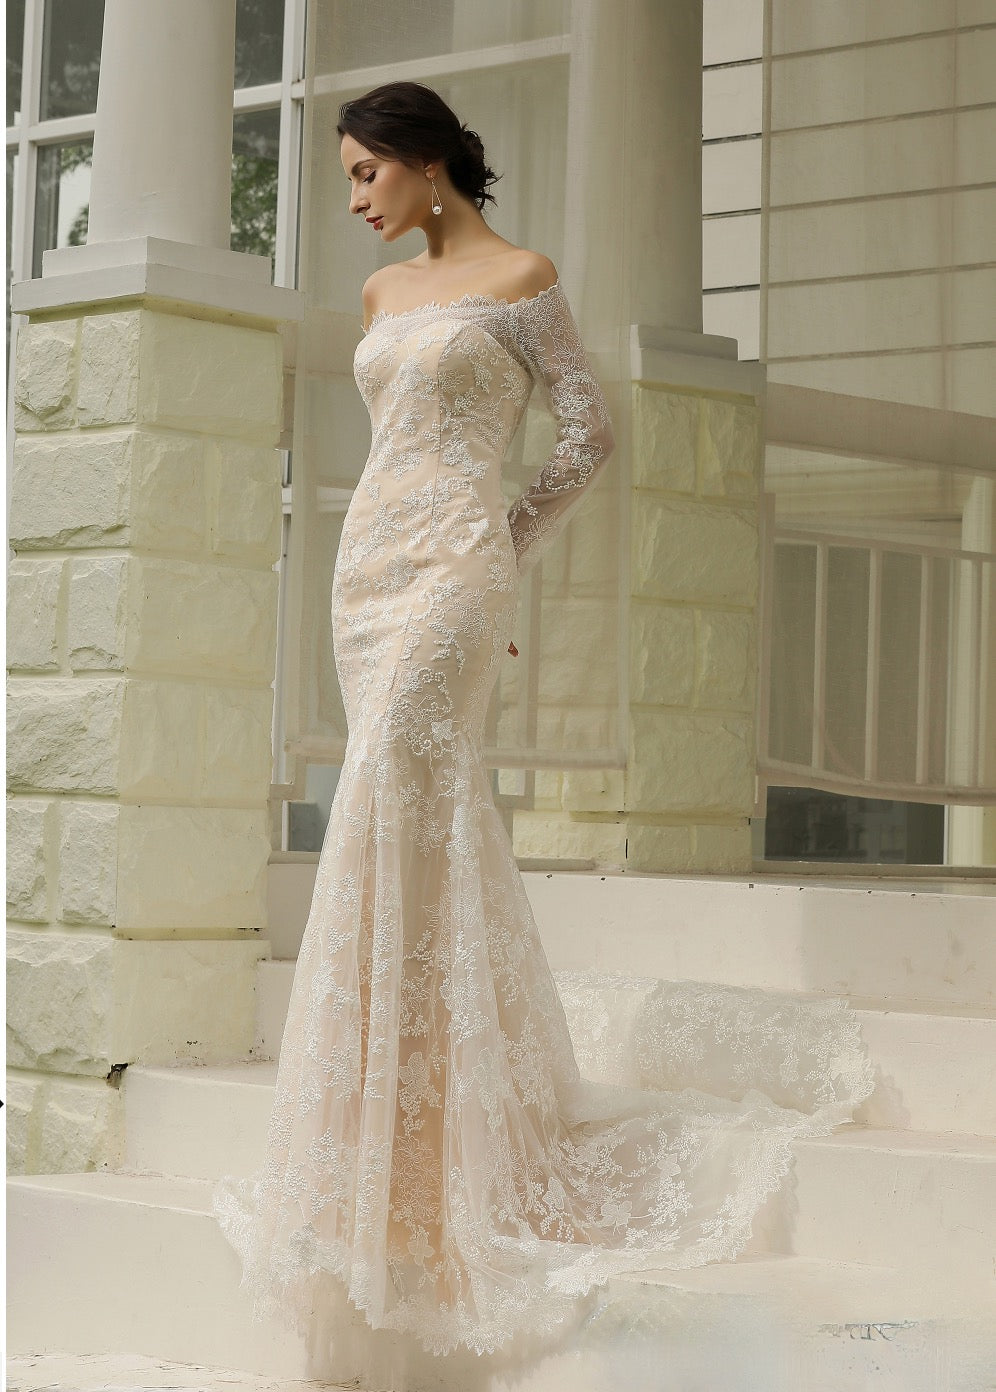 Off The Shoulder Sheath Wedding Dress With Luxury Illusion Lace Tullelux Bridal Crowns 1948